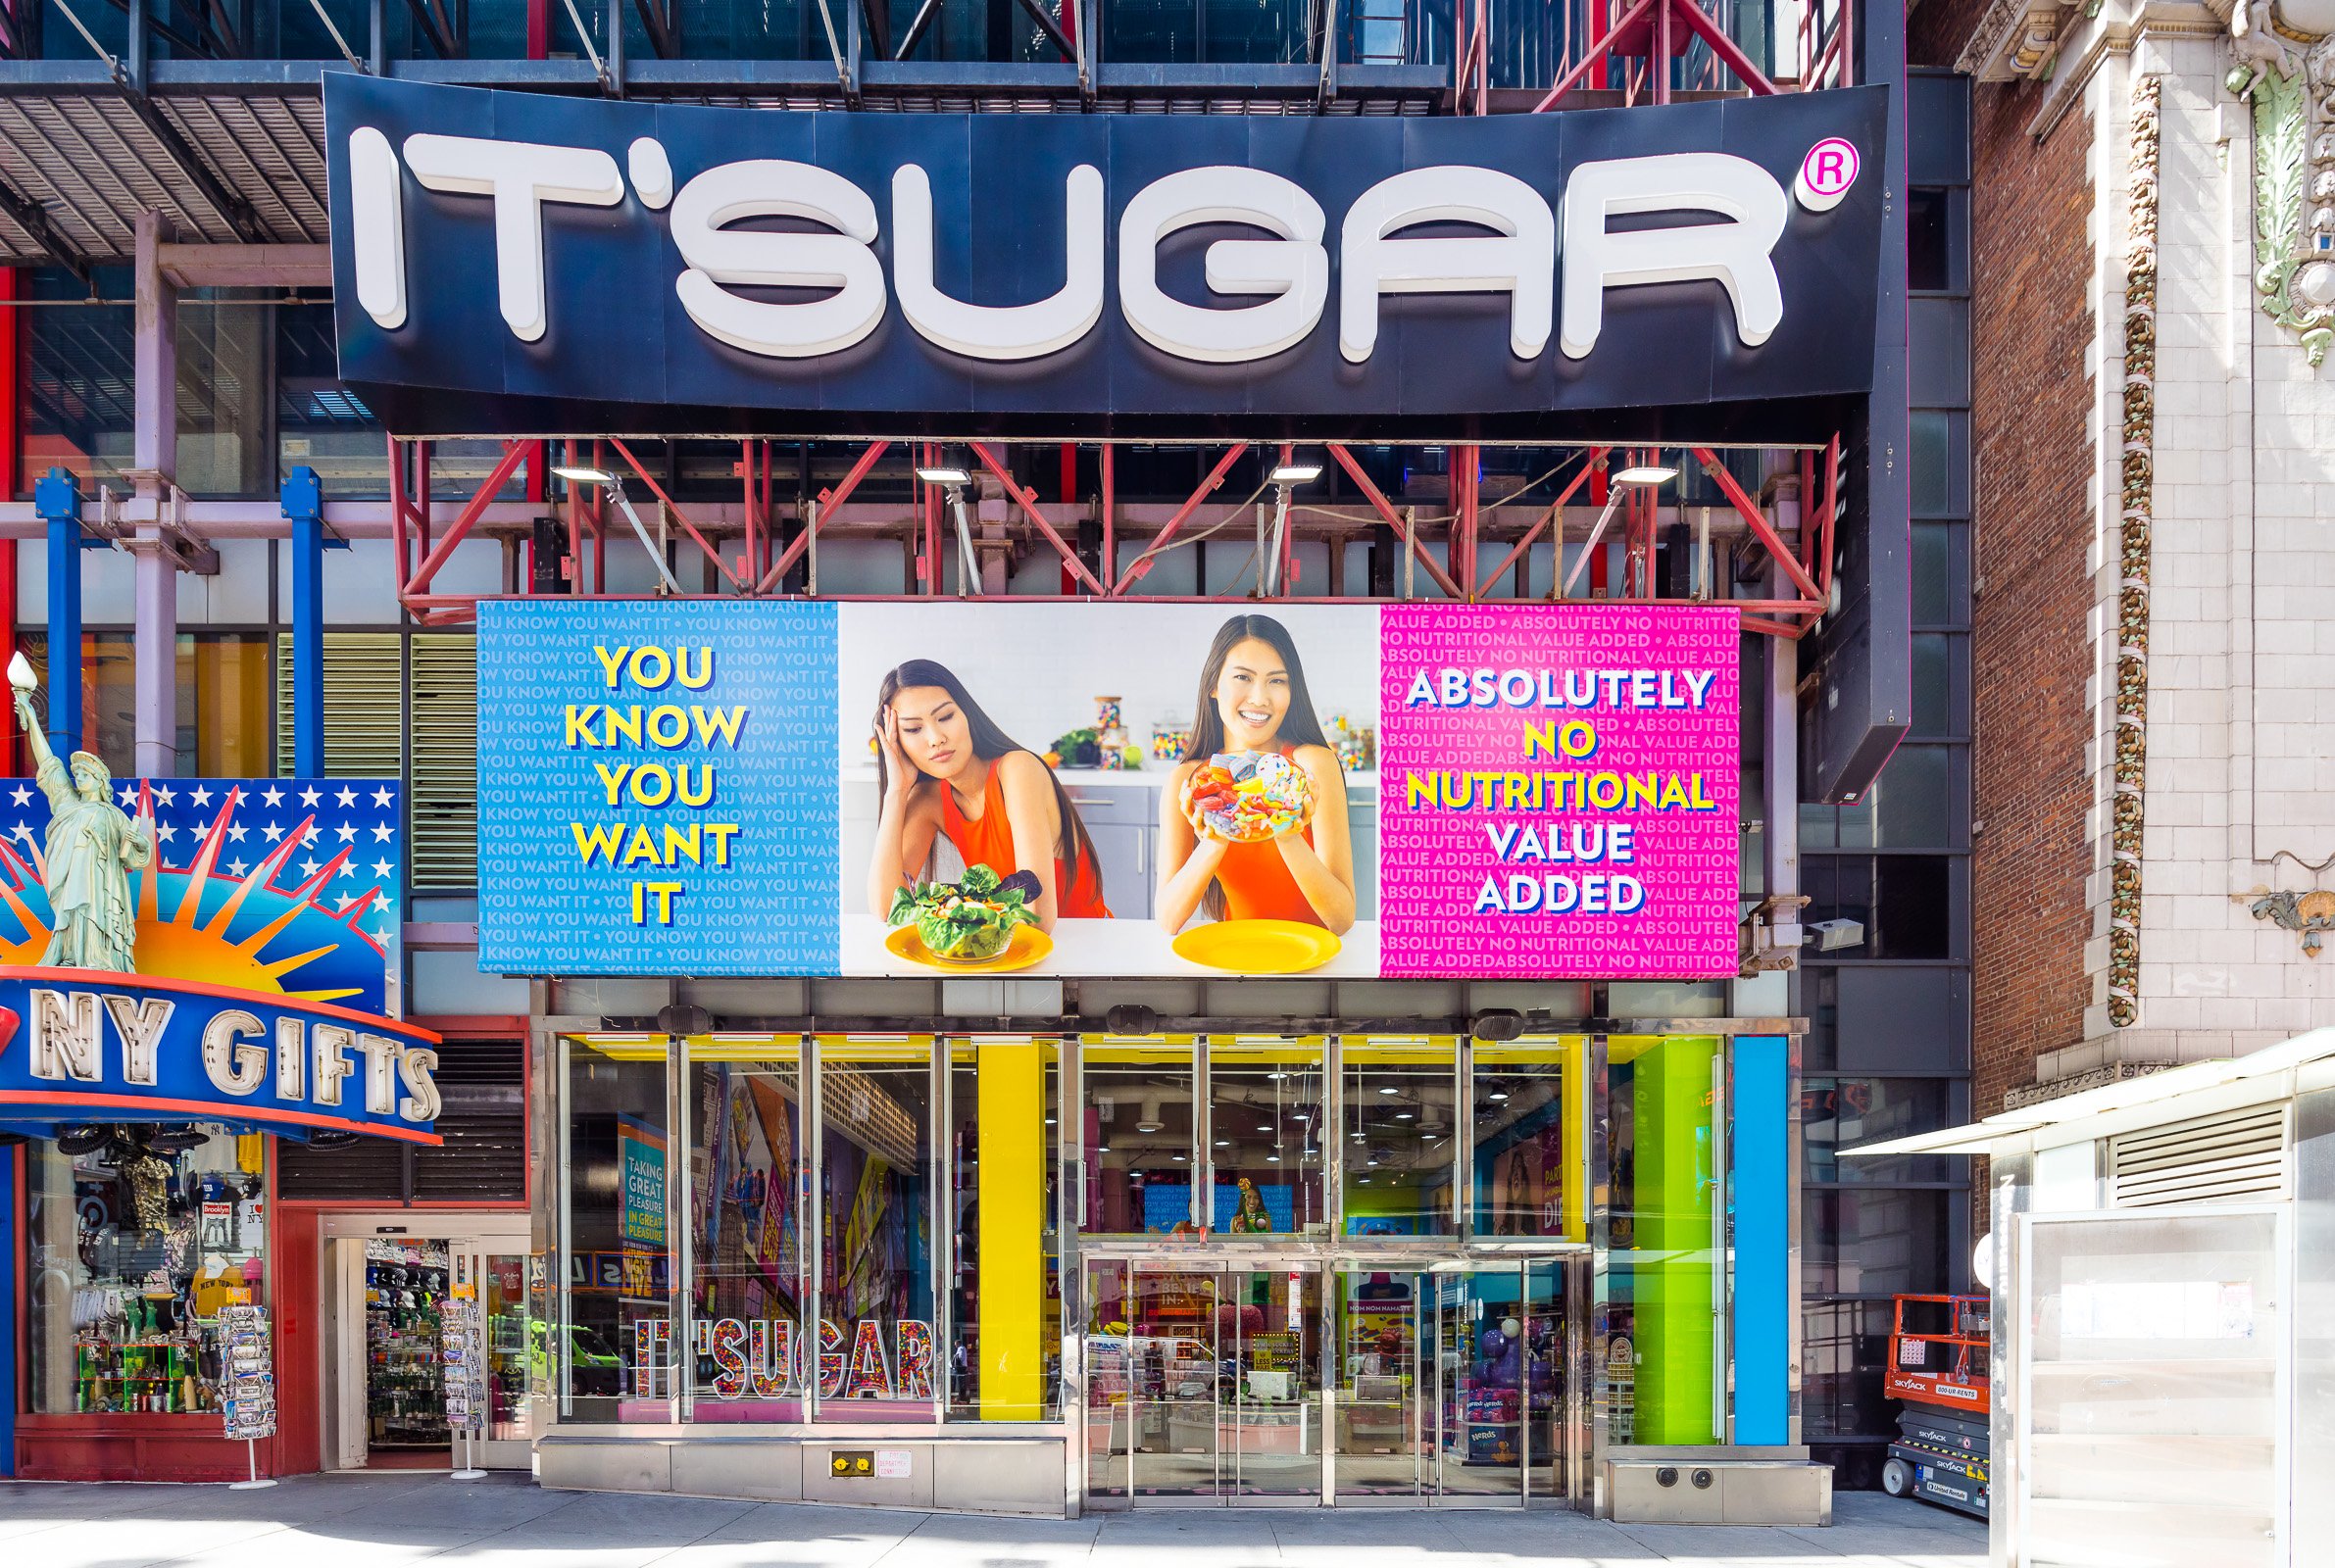 IT'SUGAR candy store set to open on Michigan Avenue - Chicago Sun-Times